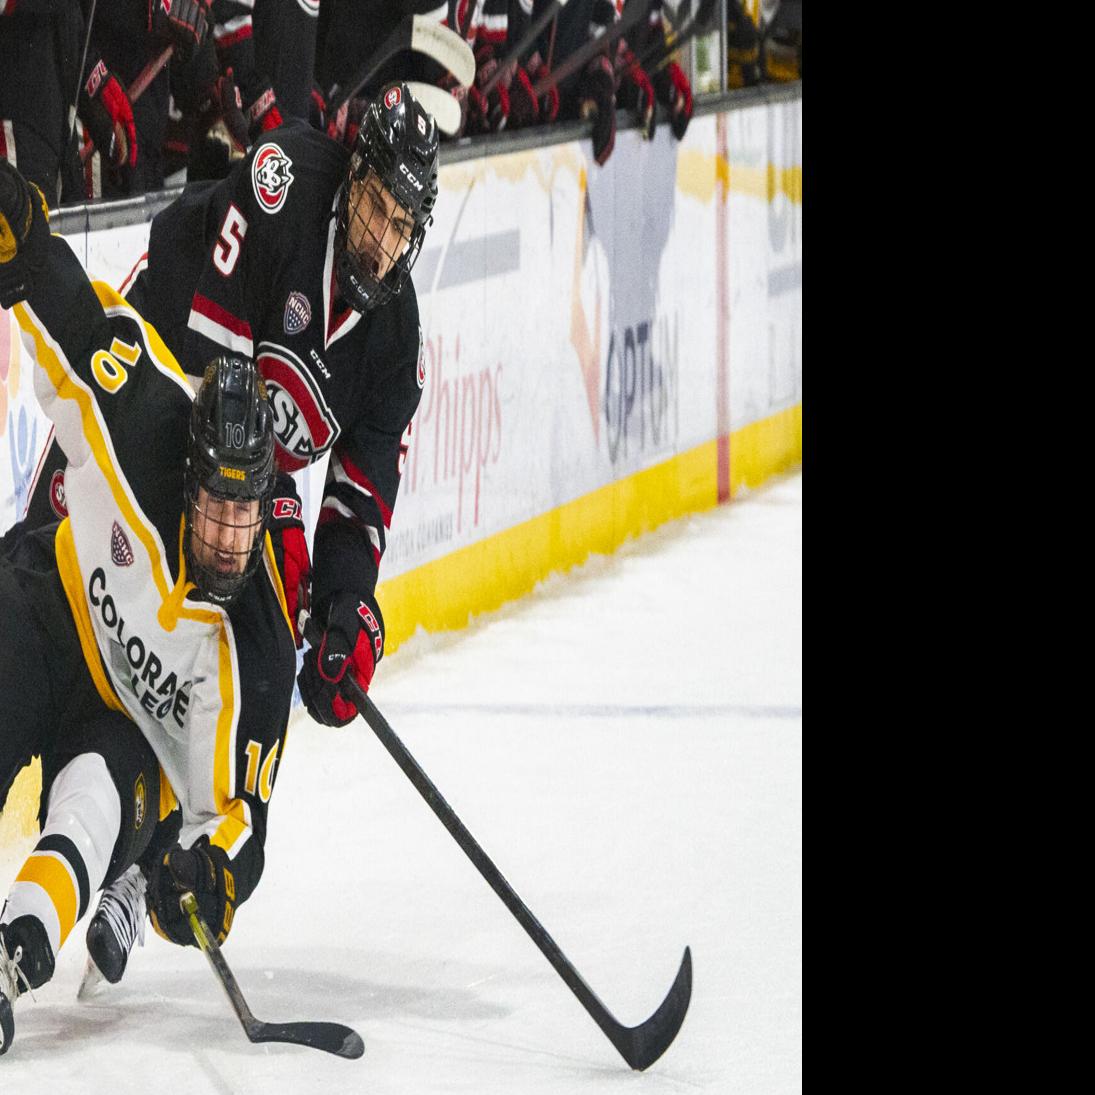 Weight, Chorske carry established hockey names into first seasons with  Colorado College, Sports